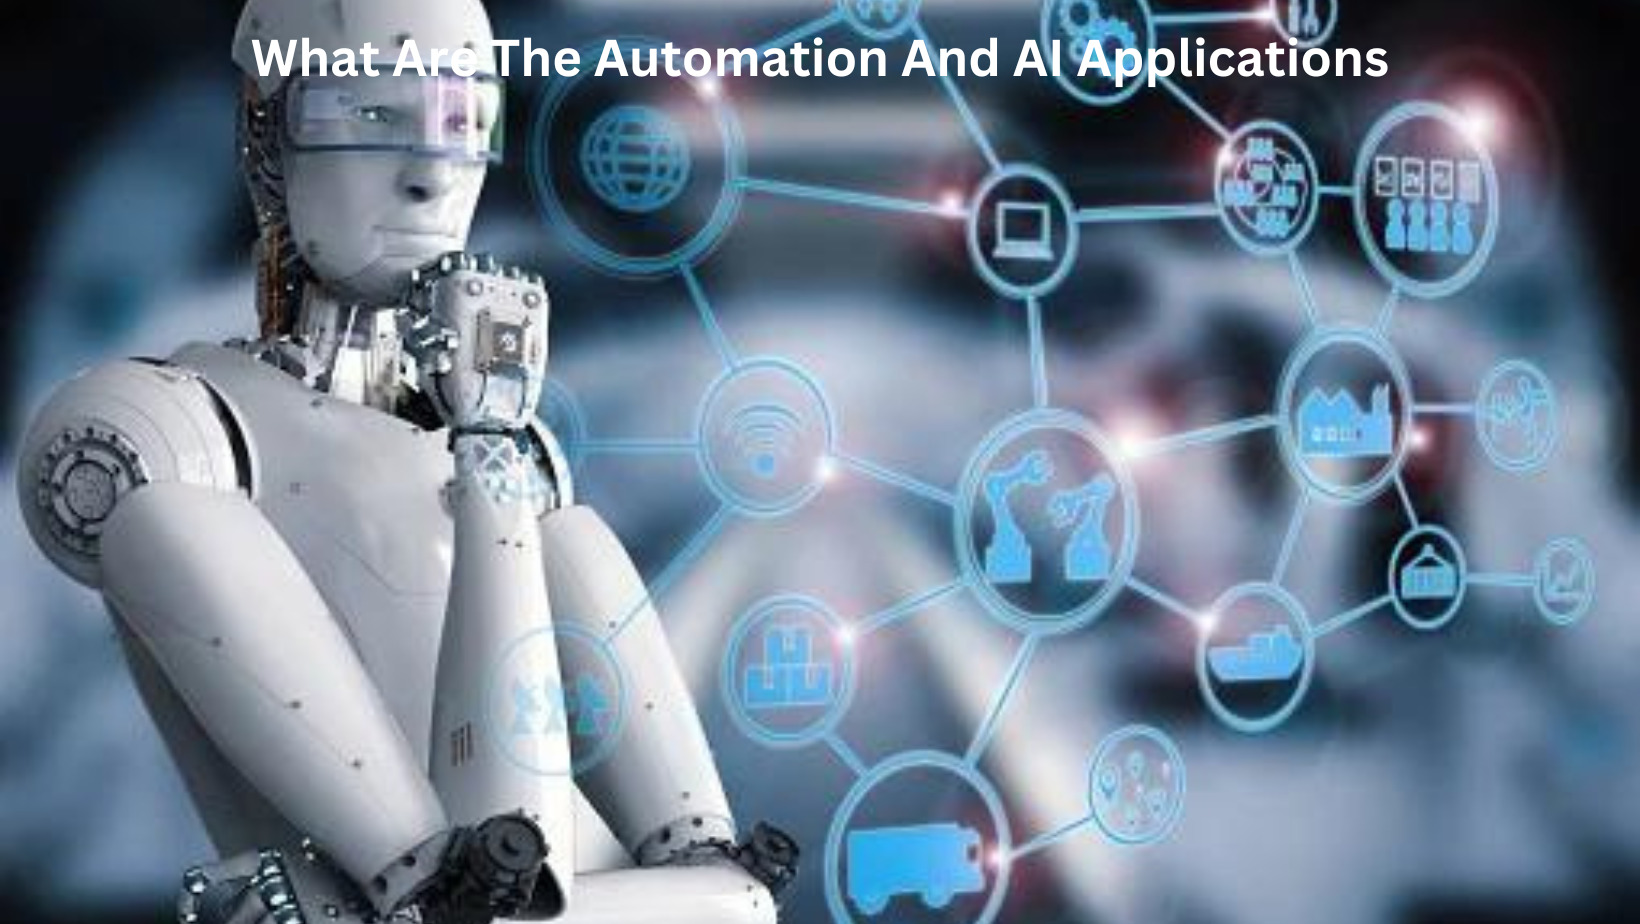 What Are The Automation And AI Applications